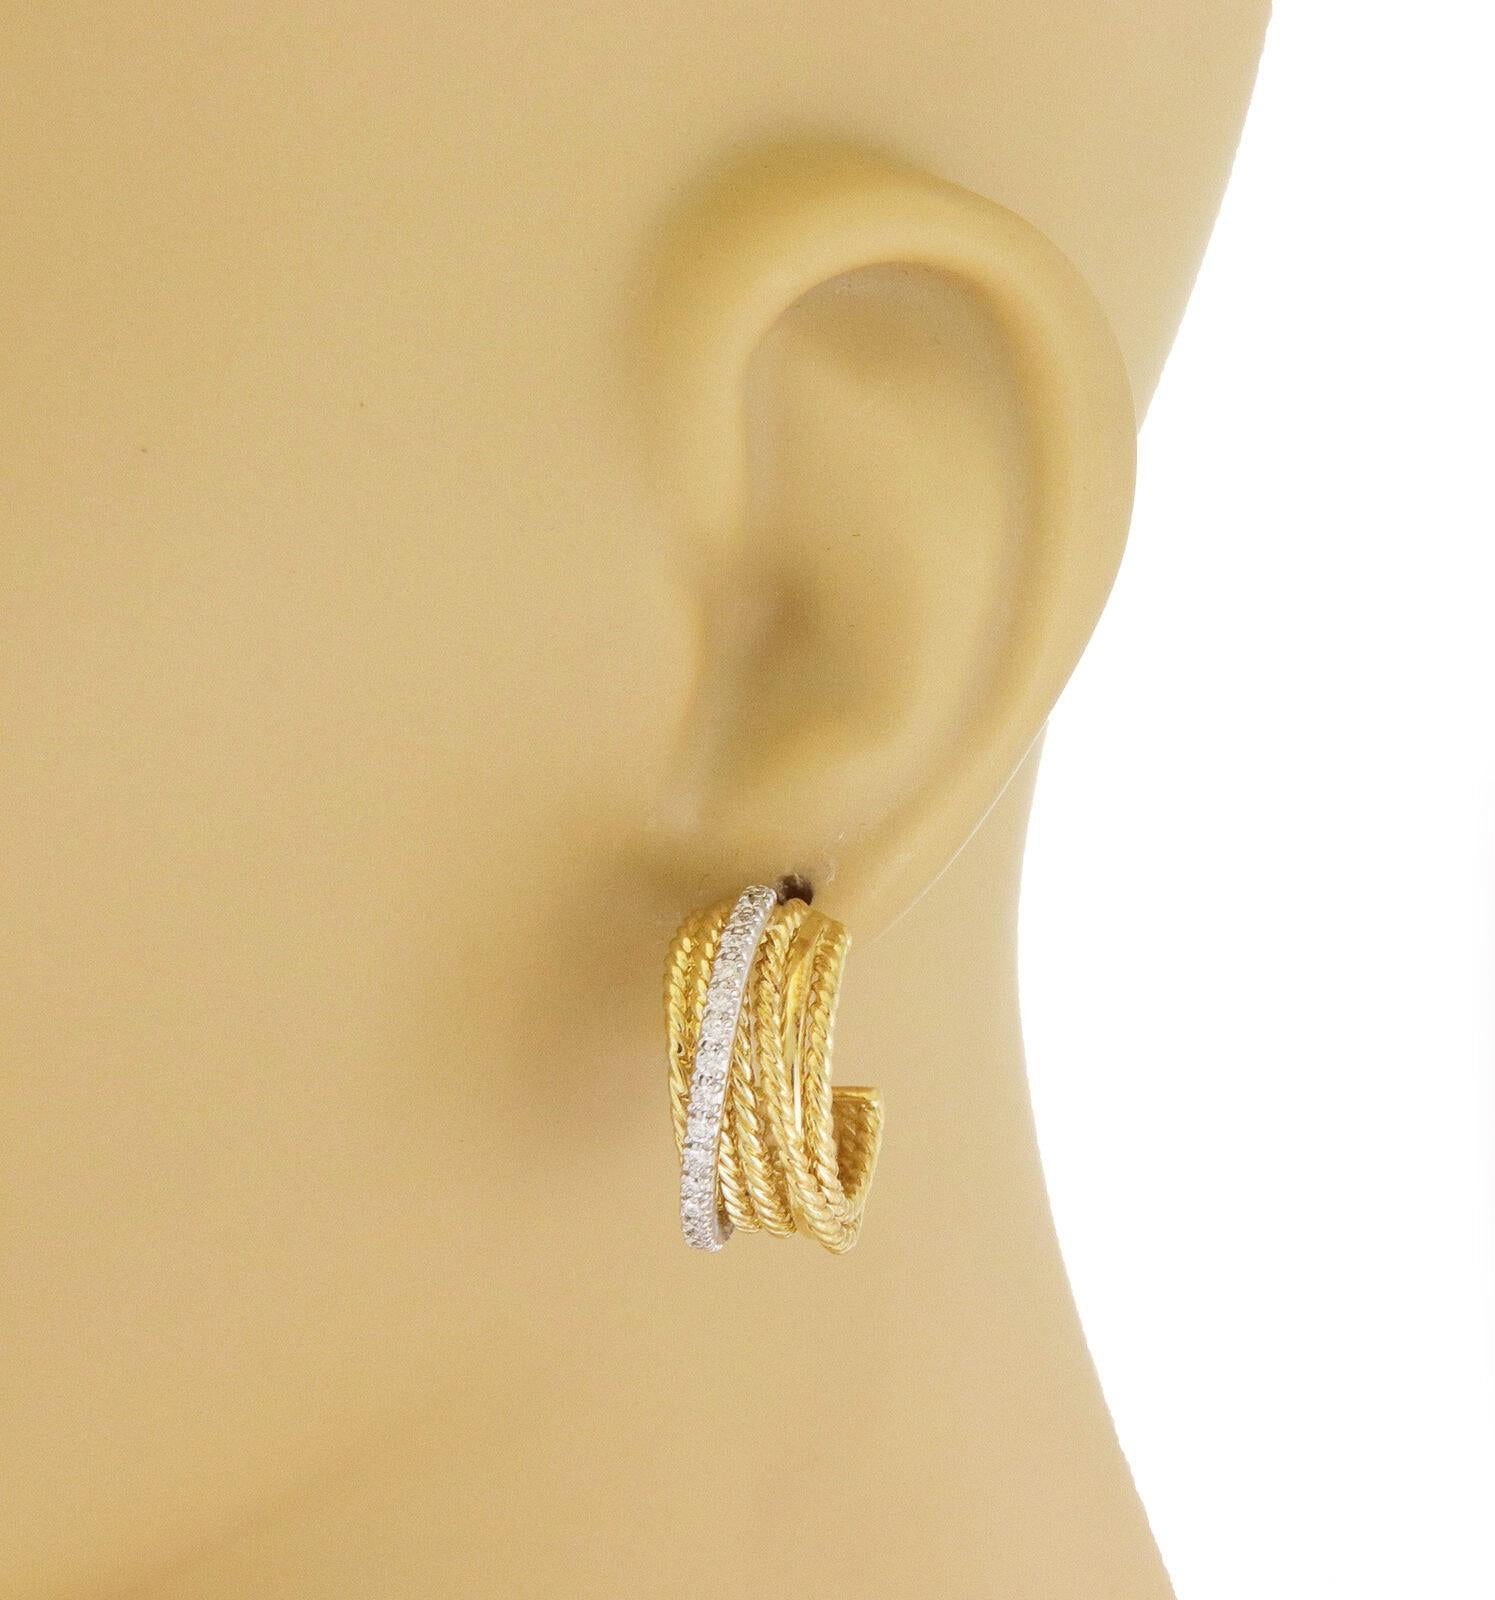 Brand: David Yurman 
Hallmark: D.Y 750
Diamond:  0.30ct  
Material:  18k yellow and white gold
Measurement: 22mm diameter x 10.5mm wide x 4.5mm high
Weight:  19.6 grams

Authentic and gorgeous from designer David Yurman, this fabulous pair of